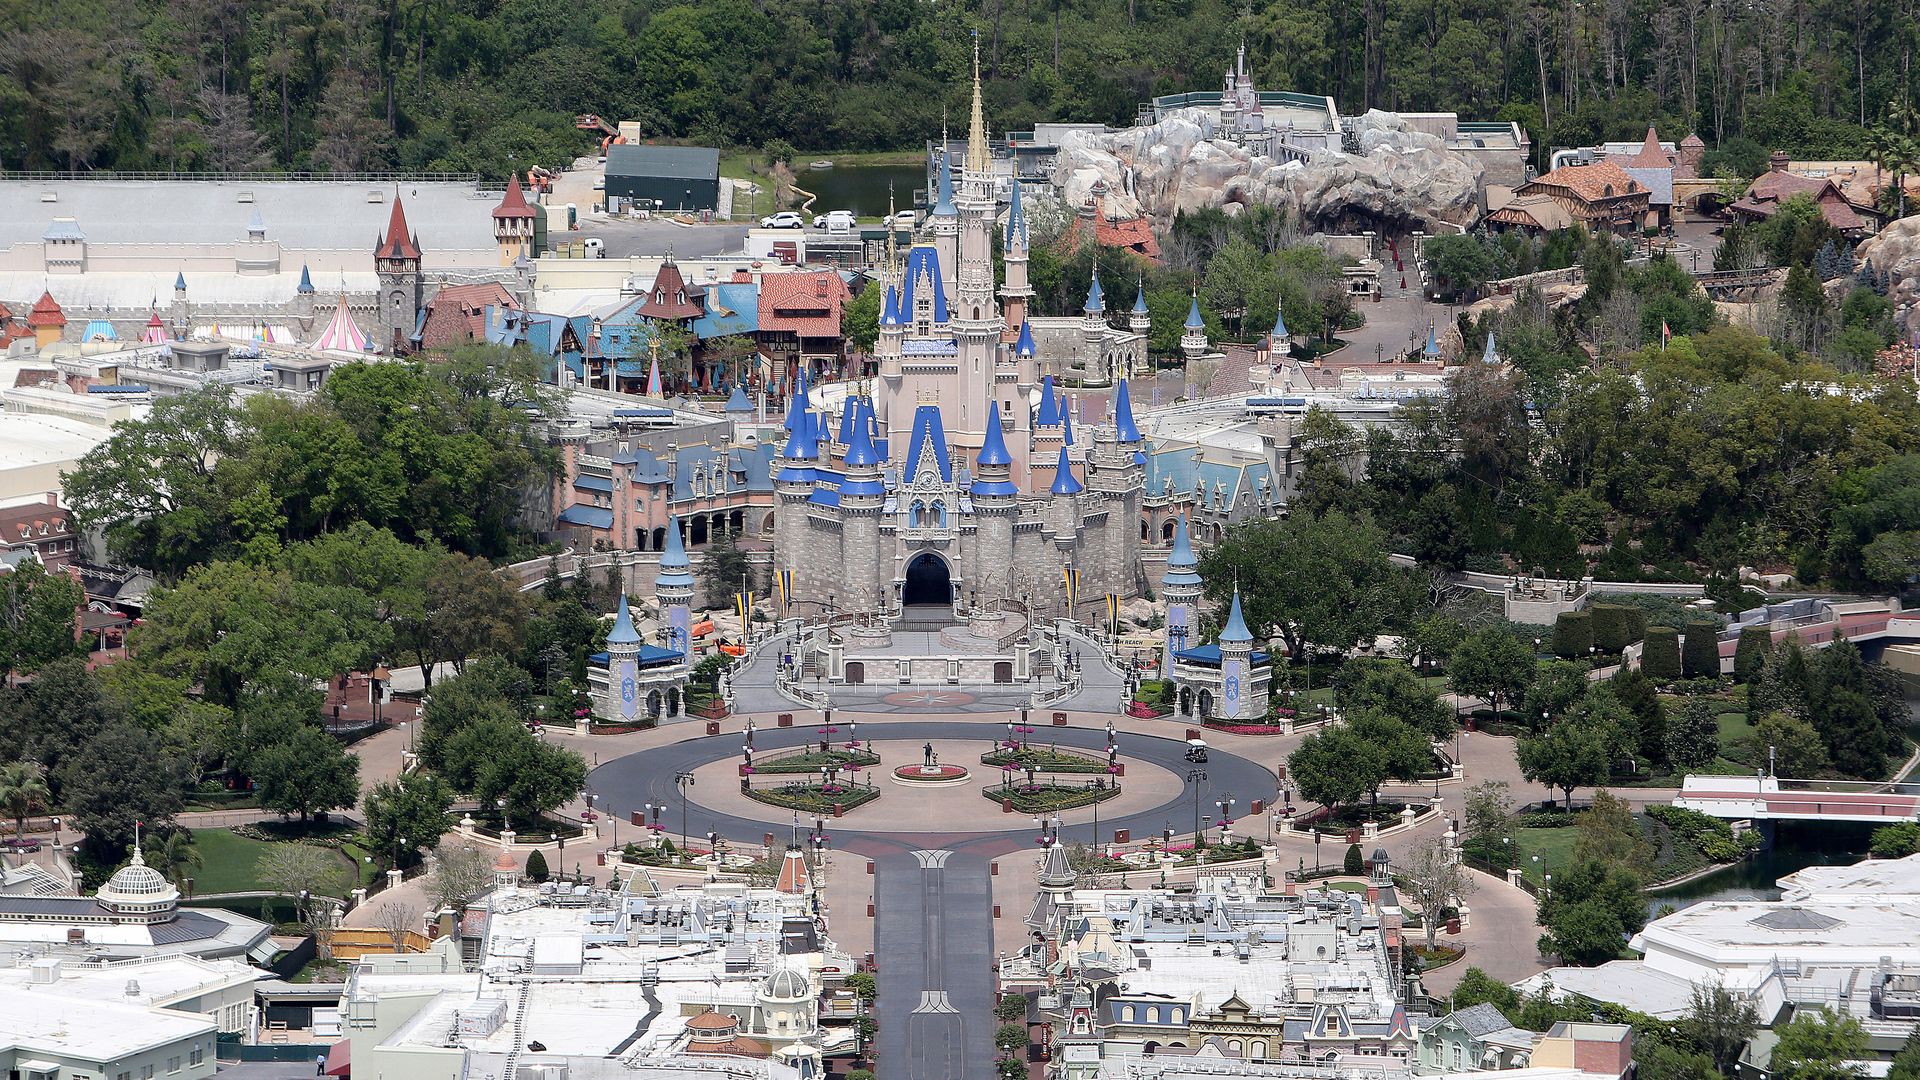 This image is an arial view of the Magic Kingdom 